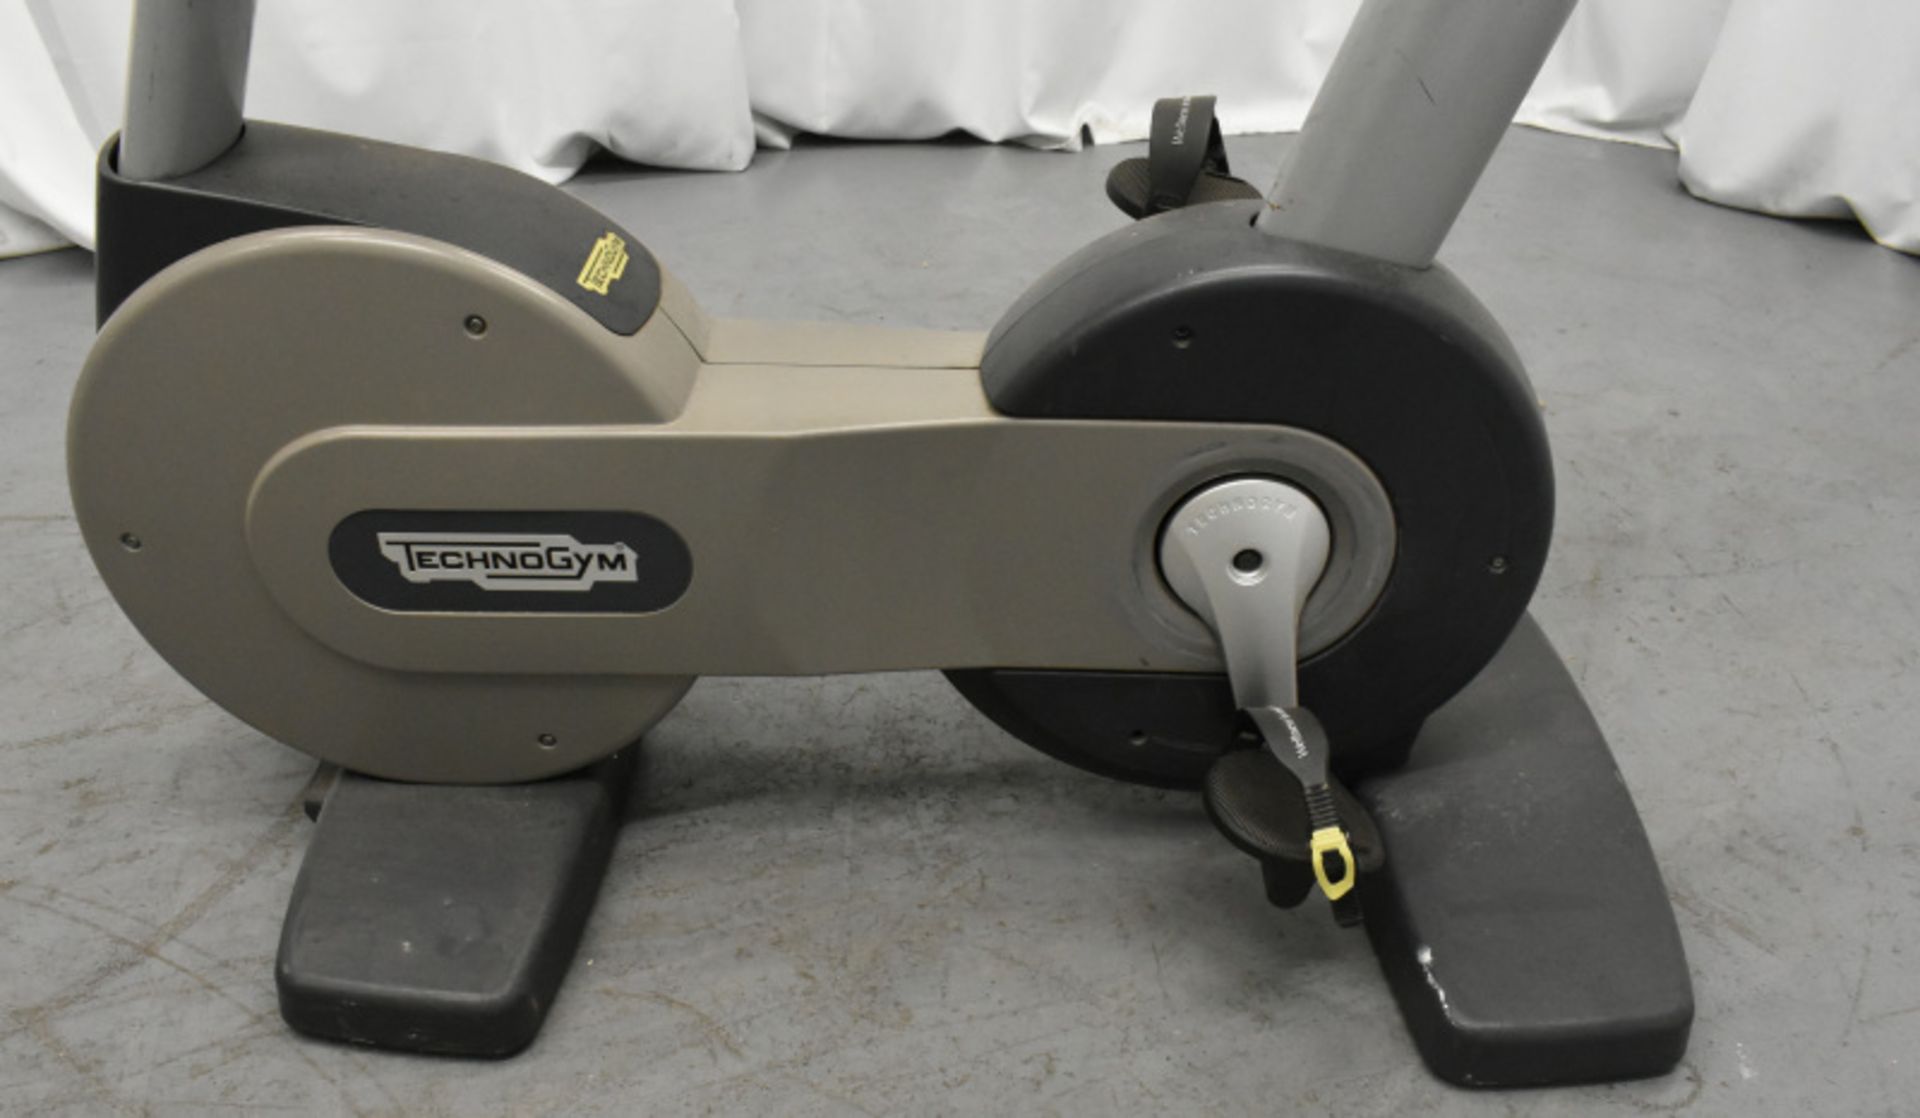 Technogym Exercise Bike - Please check pictures for overall condition - Image 2 of 10